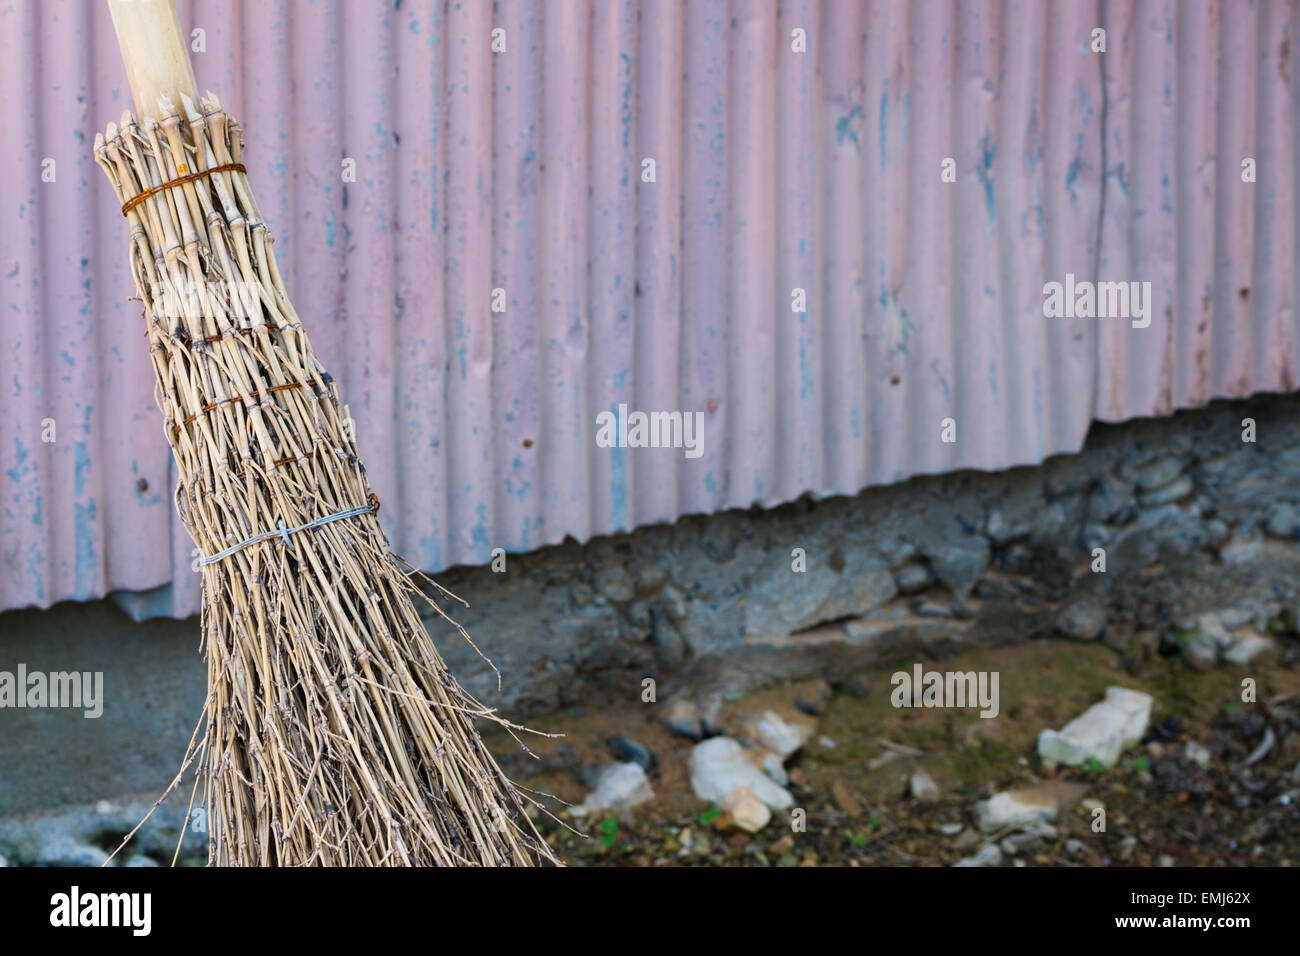 A straw bamboo broom leaning against an old wall outside. Stock Photo